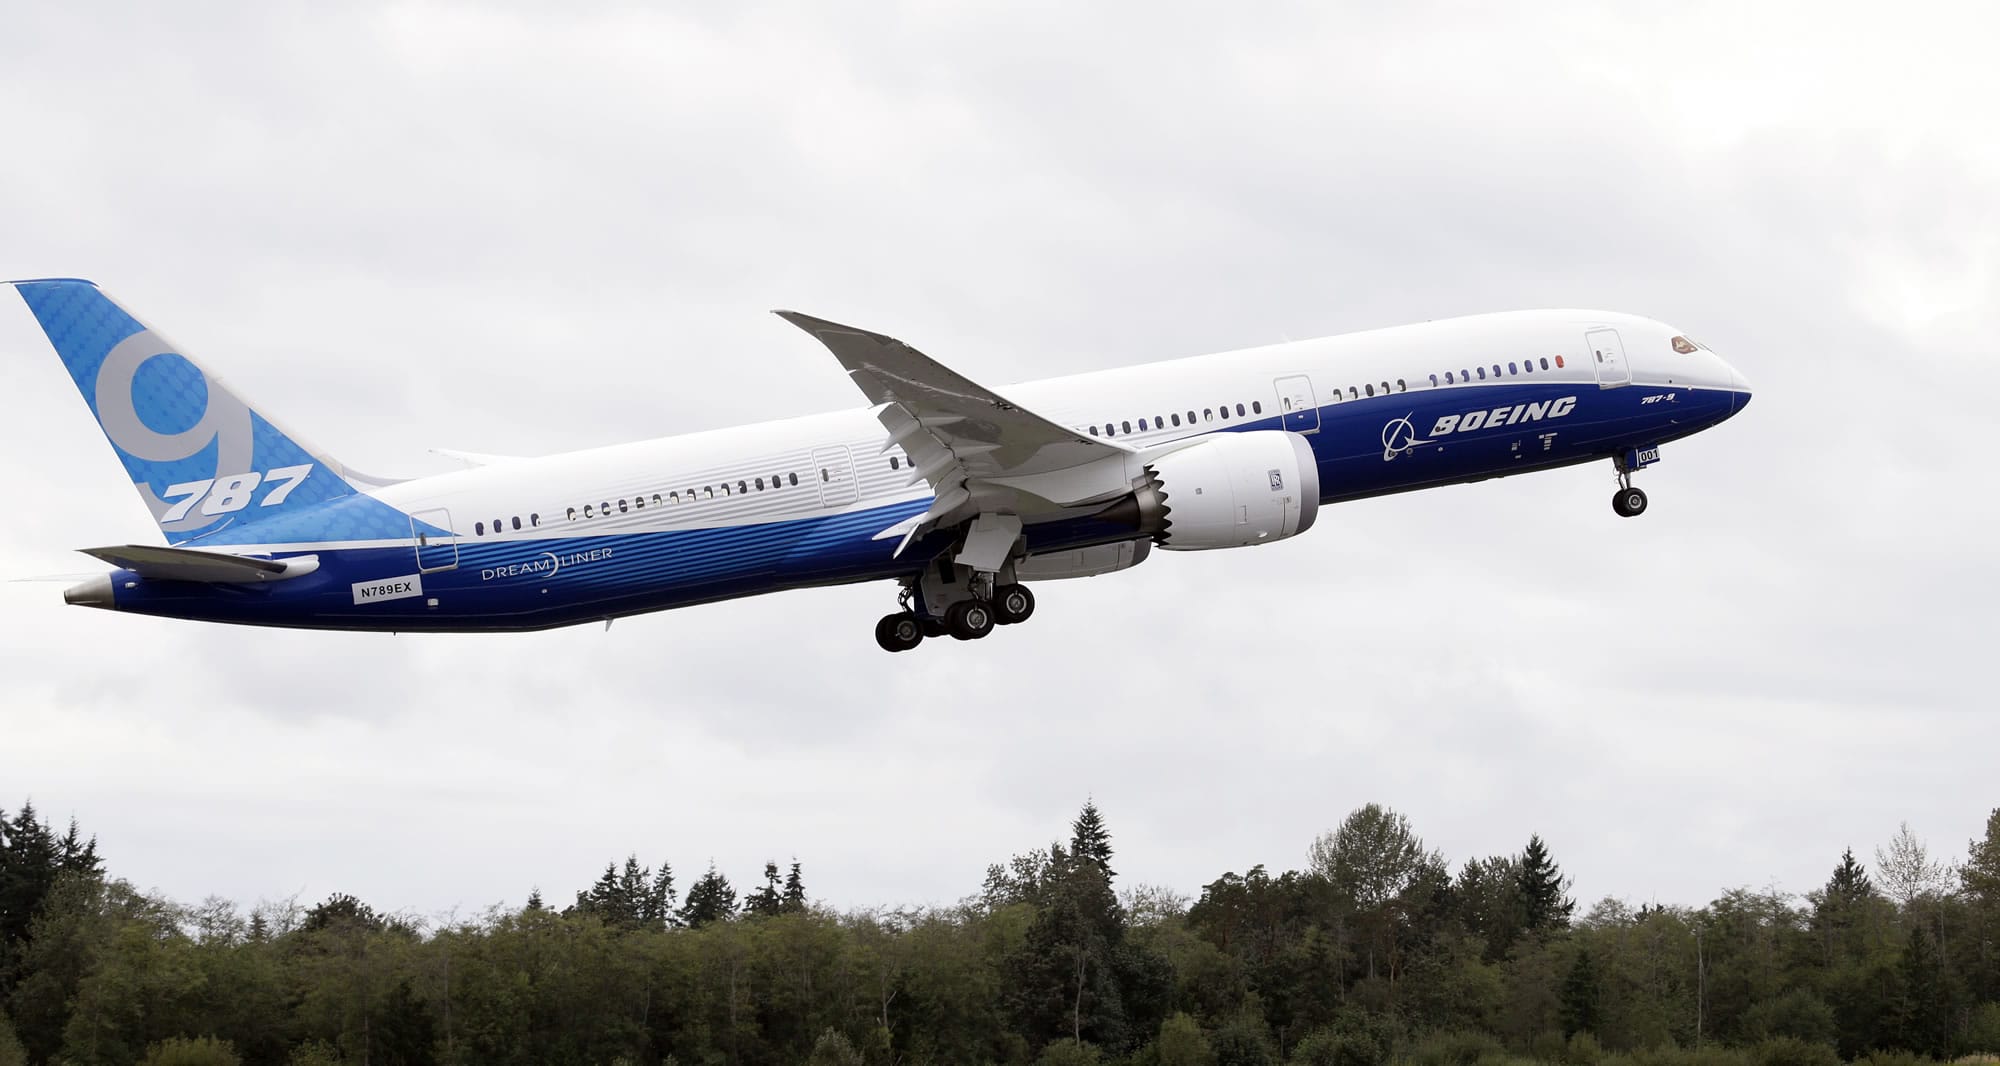 A Boeing 787-9 takes off on a first flight of the new aircraft Tuesday at Paine Field in Everett, Wash. Boeing spokeswoman Kate Bergman says the 787-9 is 20 feet longer and can seat 40 more passengers than the original 787-8, which carries between 210 and 250 passengers.